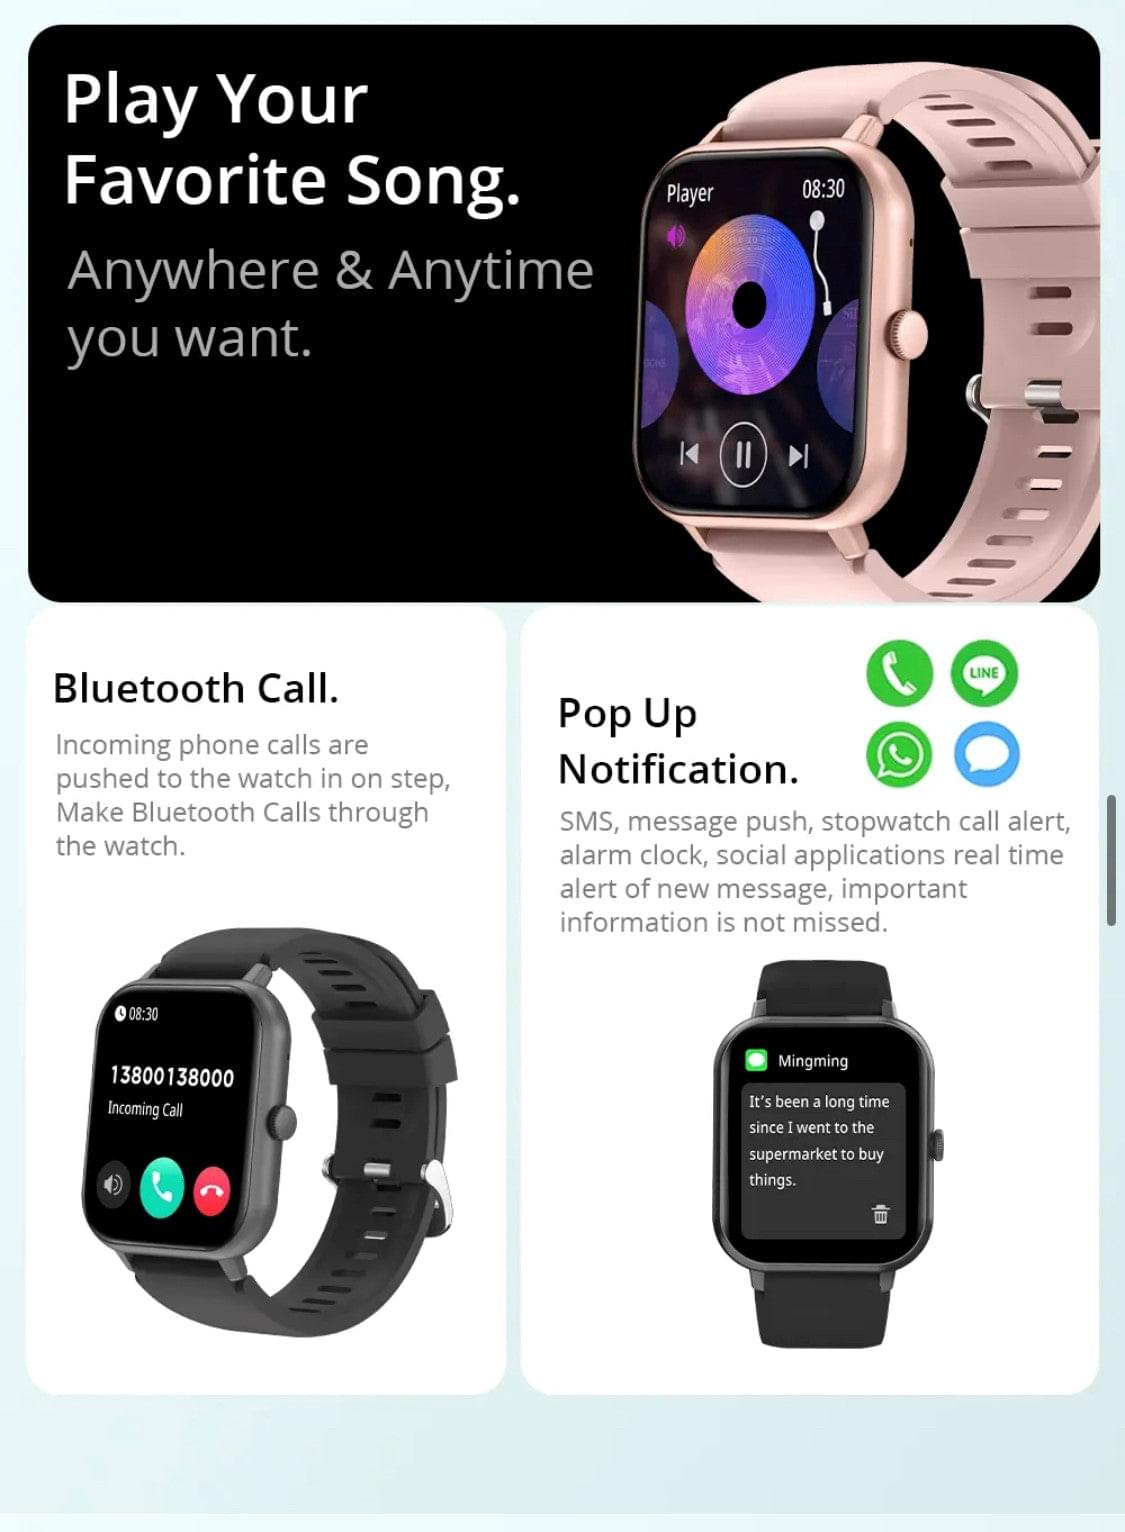 Colmi P30 Pink Smart Watch South Africa